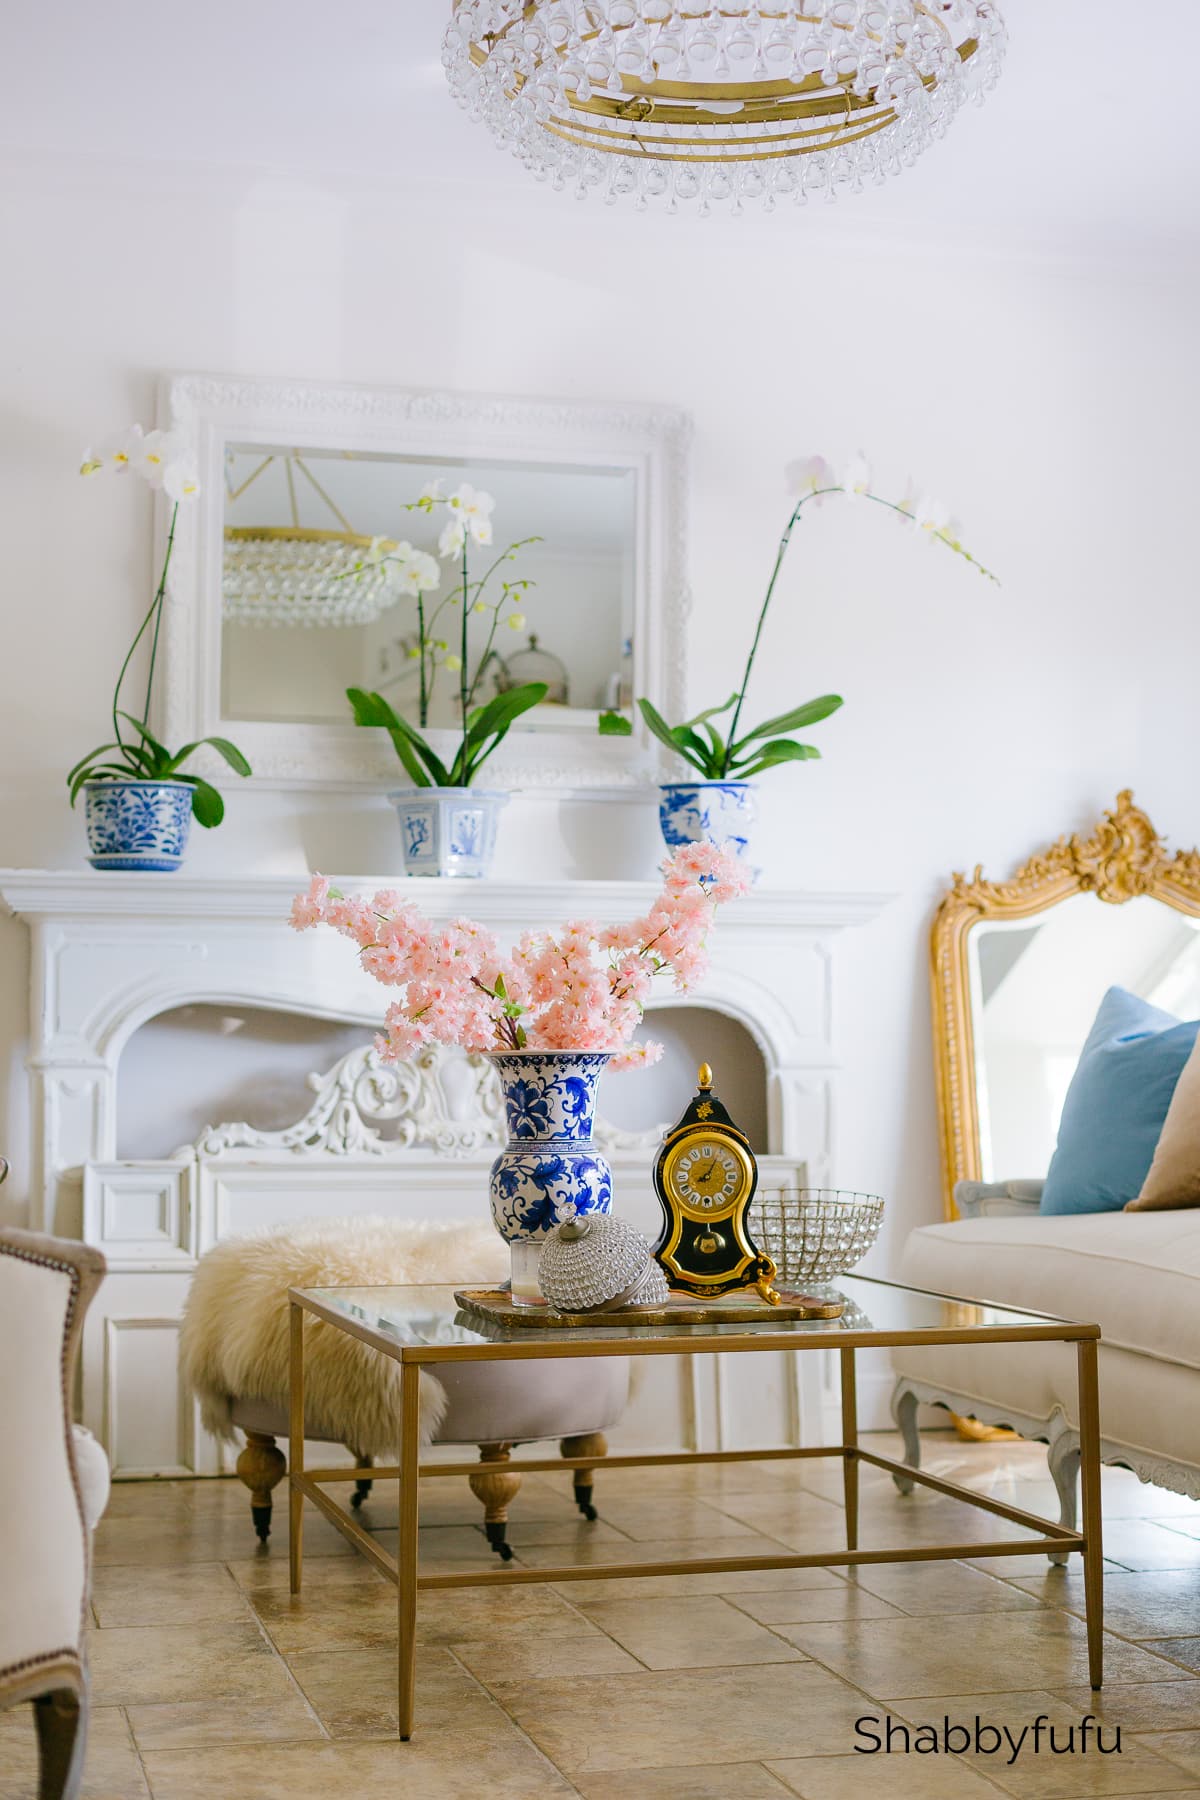 Blue and white porcelain, a French fireplace, and traditional furnishings in a living room with Grandmillennial style - Shabbyfufu. #grandmillennialstyle #livingroom #traditionaldecor